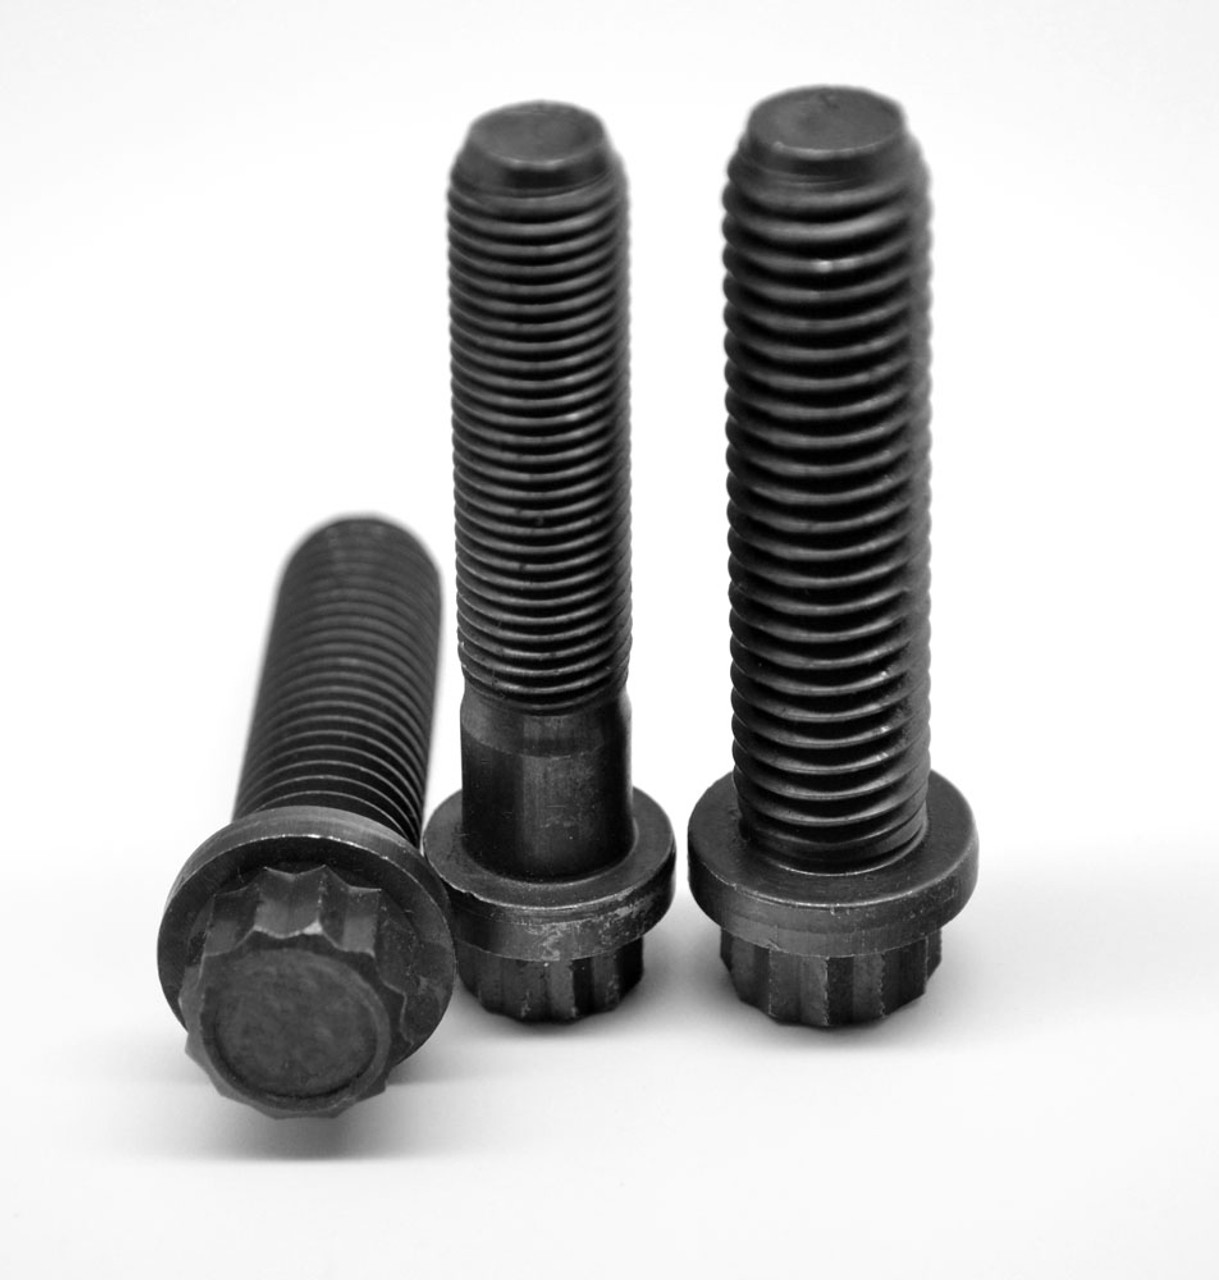 5/8-11 x 1 Coarse Thread 12-Point Flange Screw Alloy Steel Thermal Black Oxide